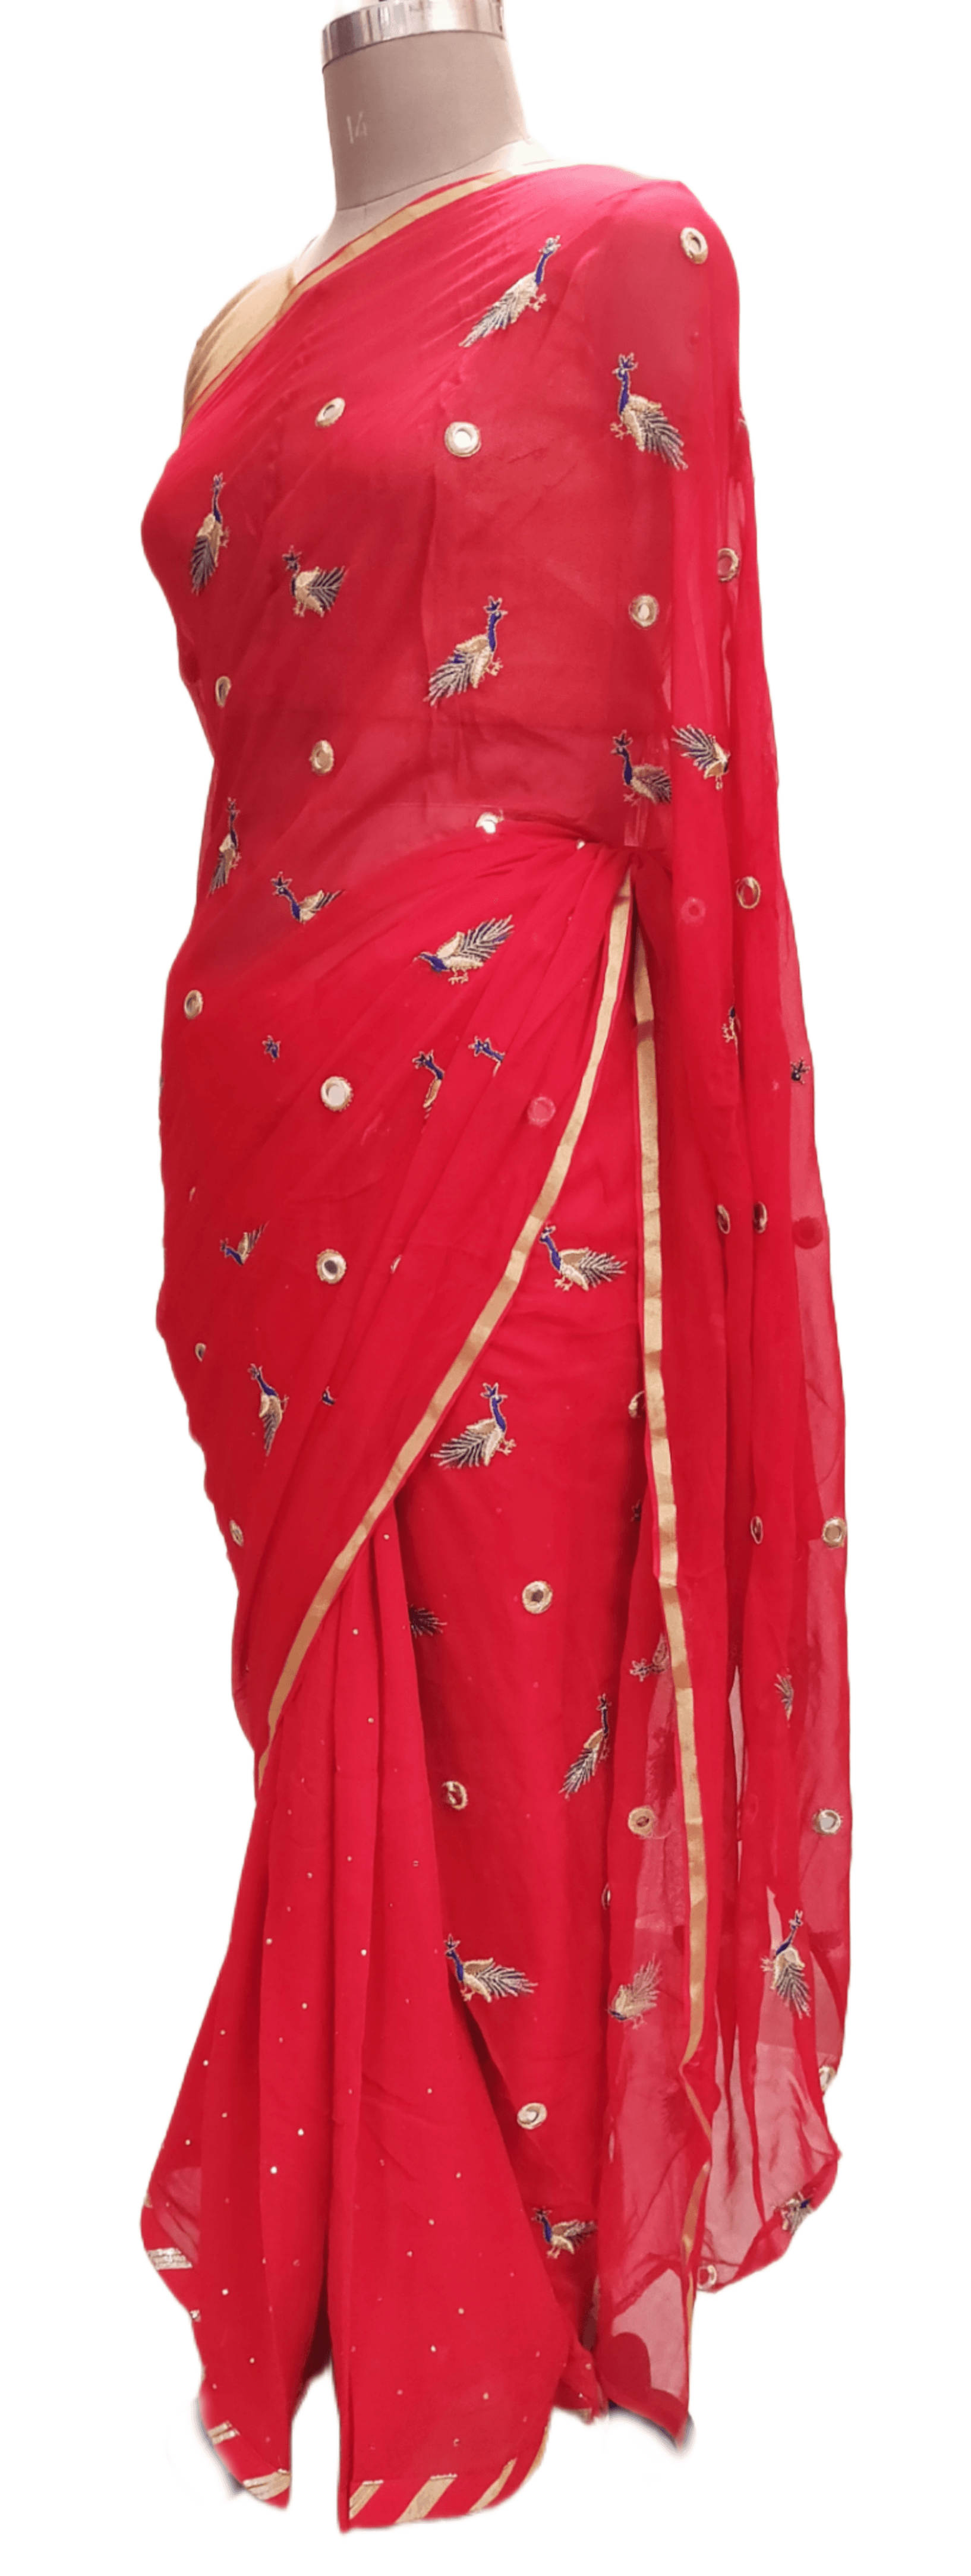 Designer Red Chiffon Georgette Peacock Motif Saree SP07 - Ethnic's By Anvi Creations